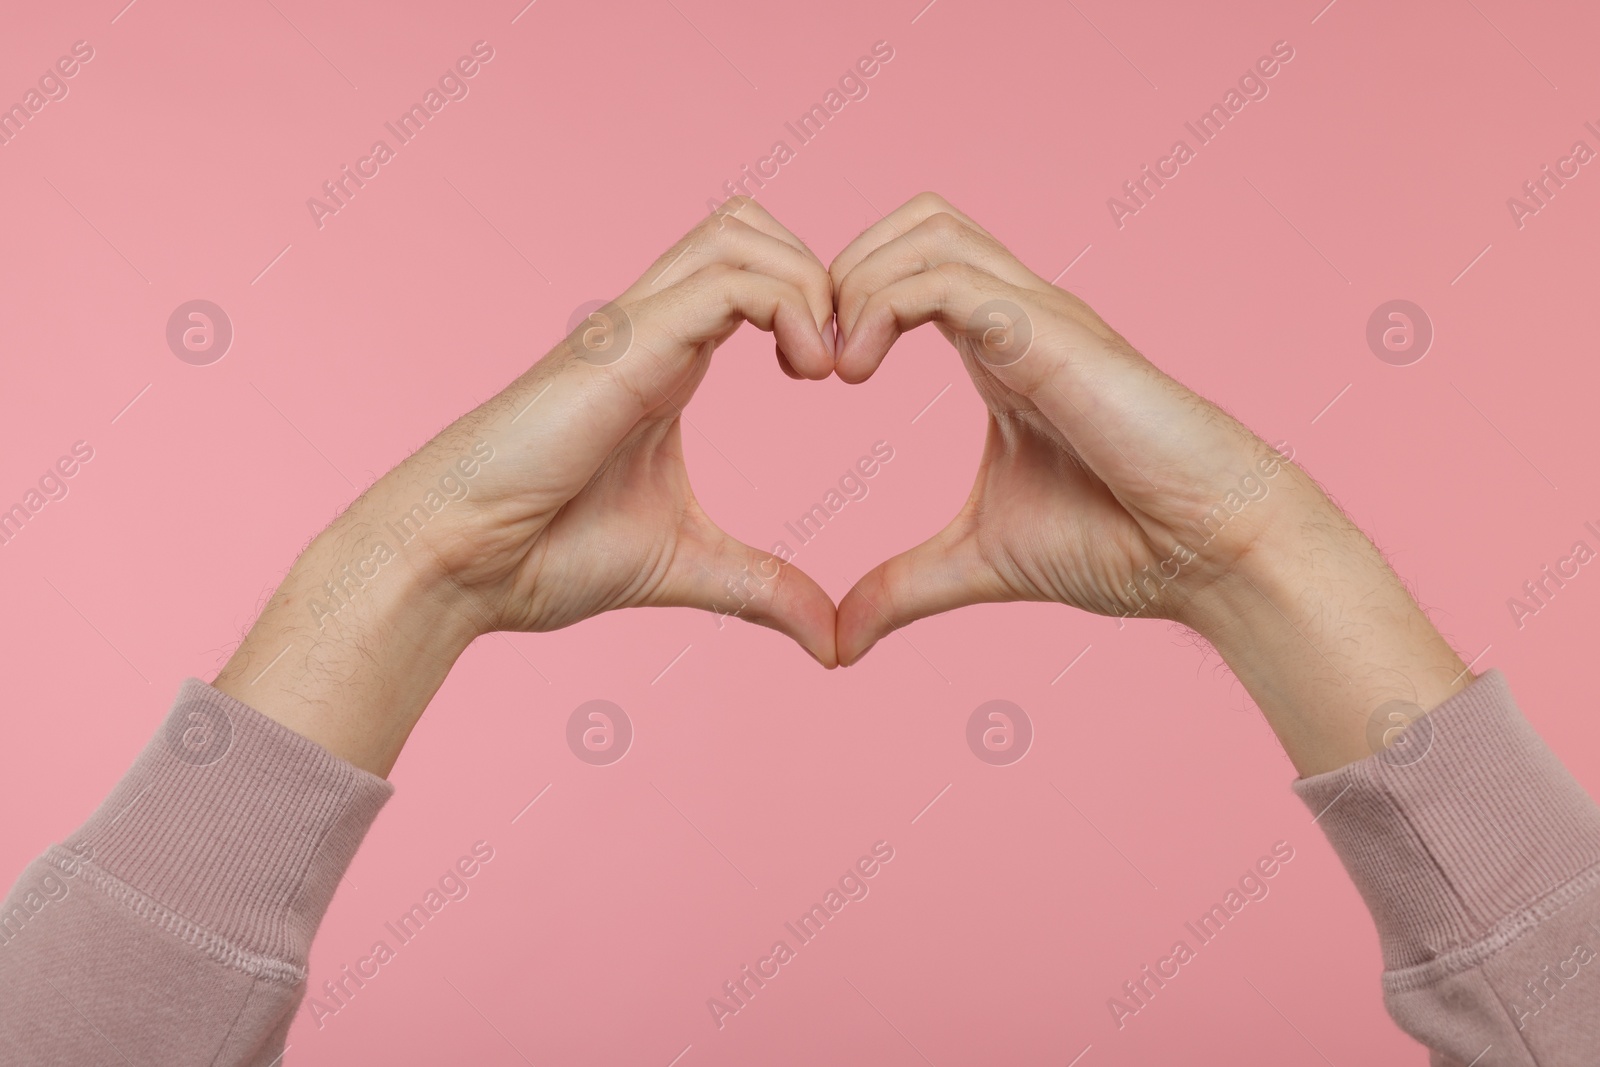 Photo of Man showing heart gesture with hands on pink background, closeup